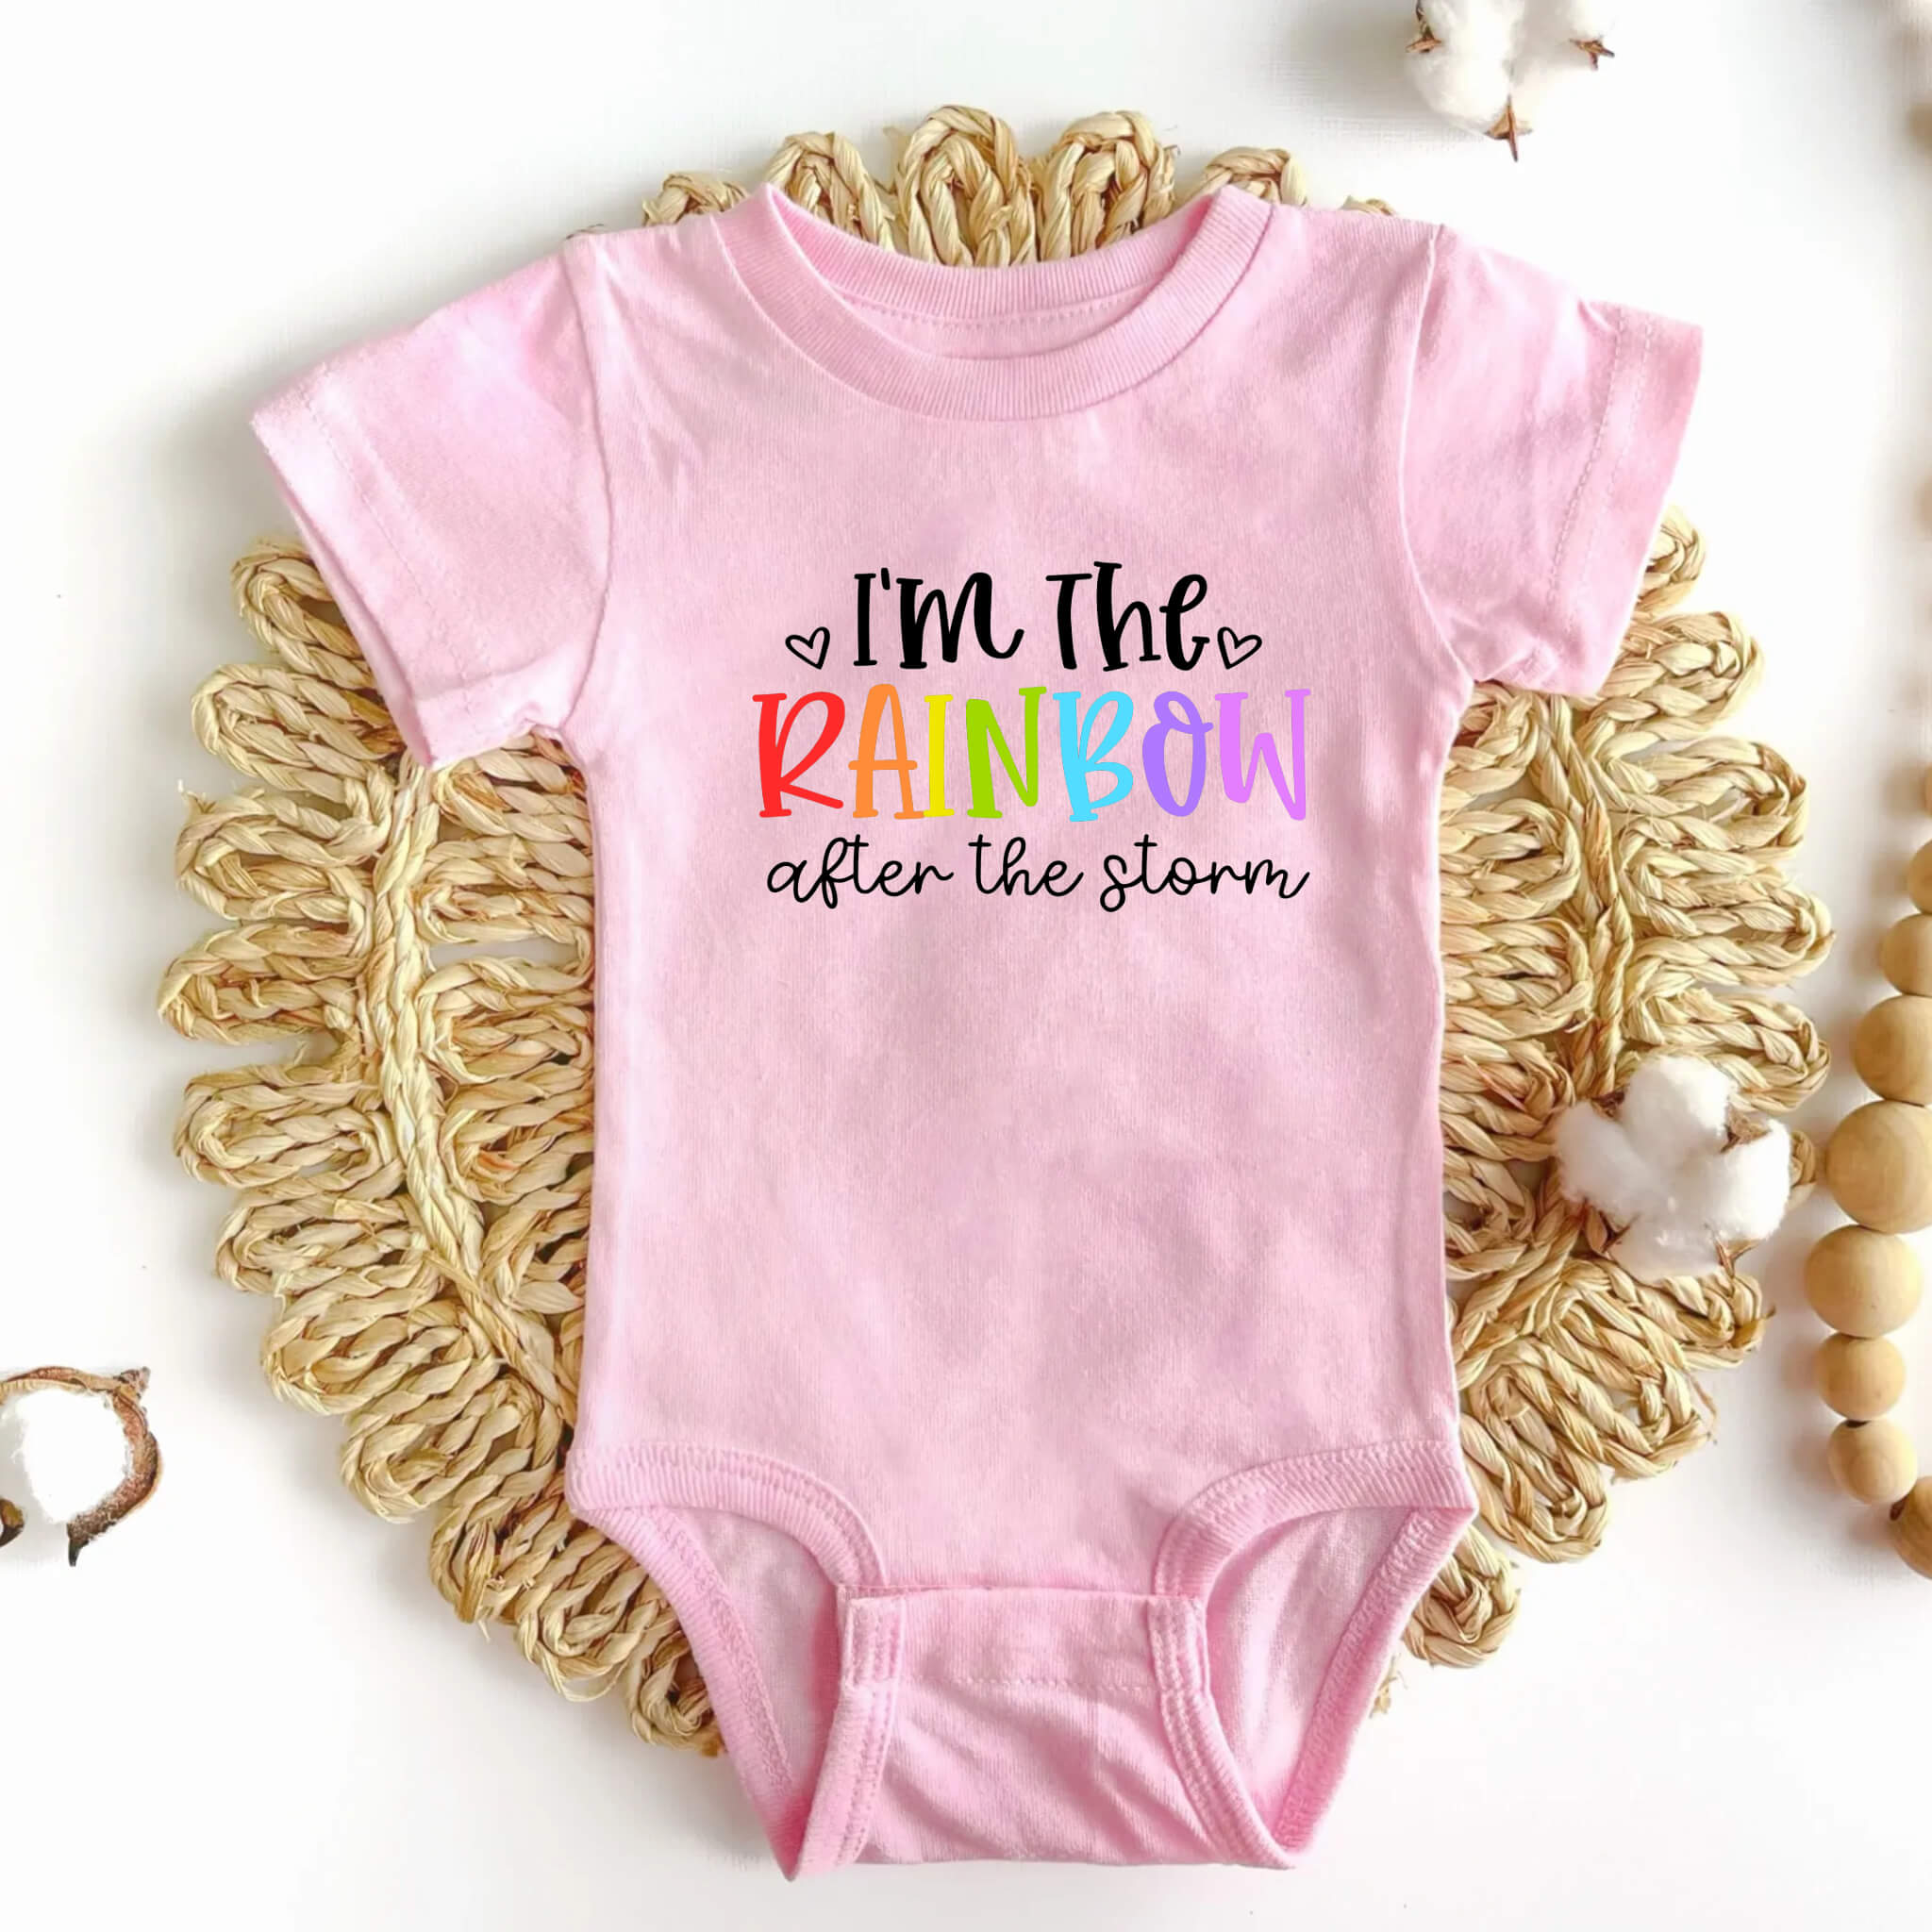 New Baby Onesie, I’m The Rainbow After The Storm, Baby Bodysuit, Boy’s, Girl’s Baby Shower Gift, New Baby Take Home Outfit, Maternity Photo Prop Onesie, Rainbow Baby Onesie Outfit